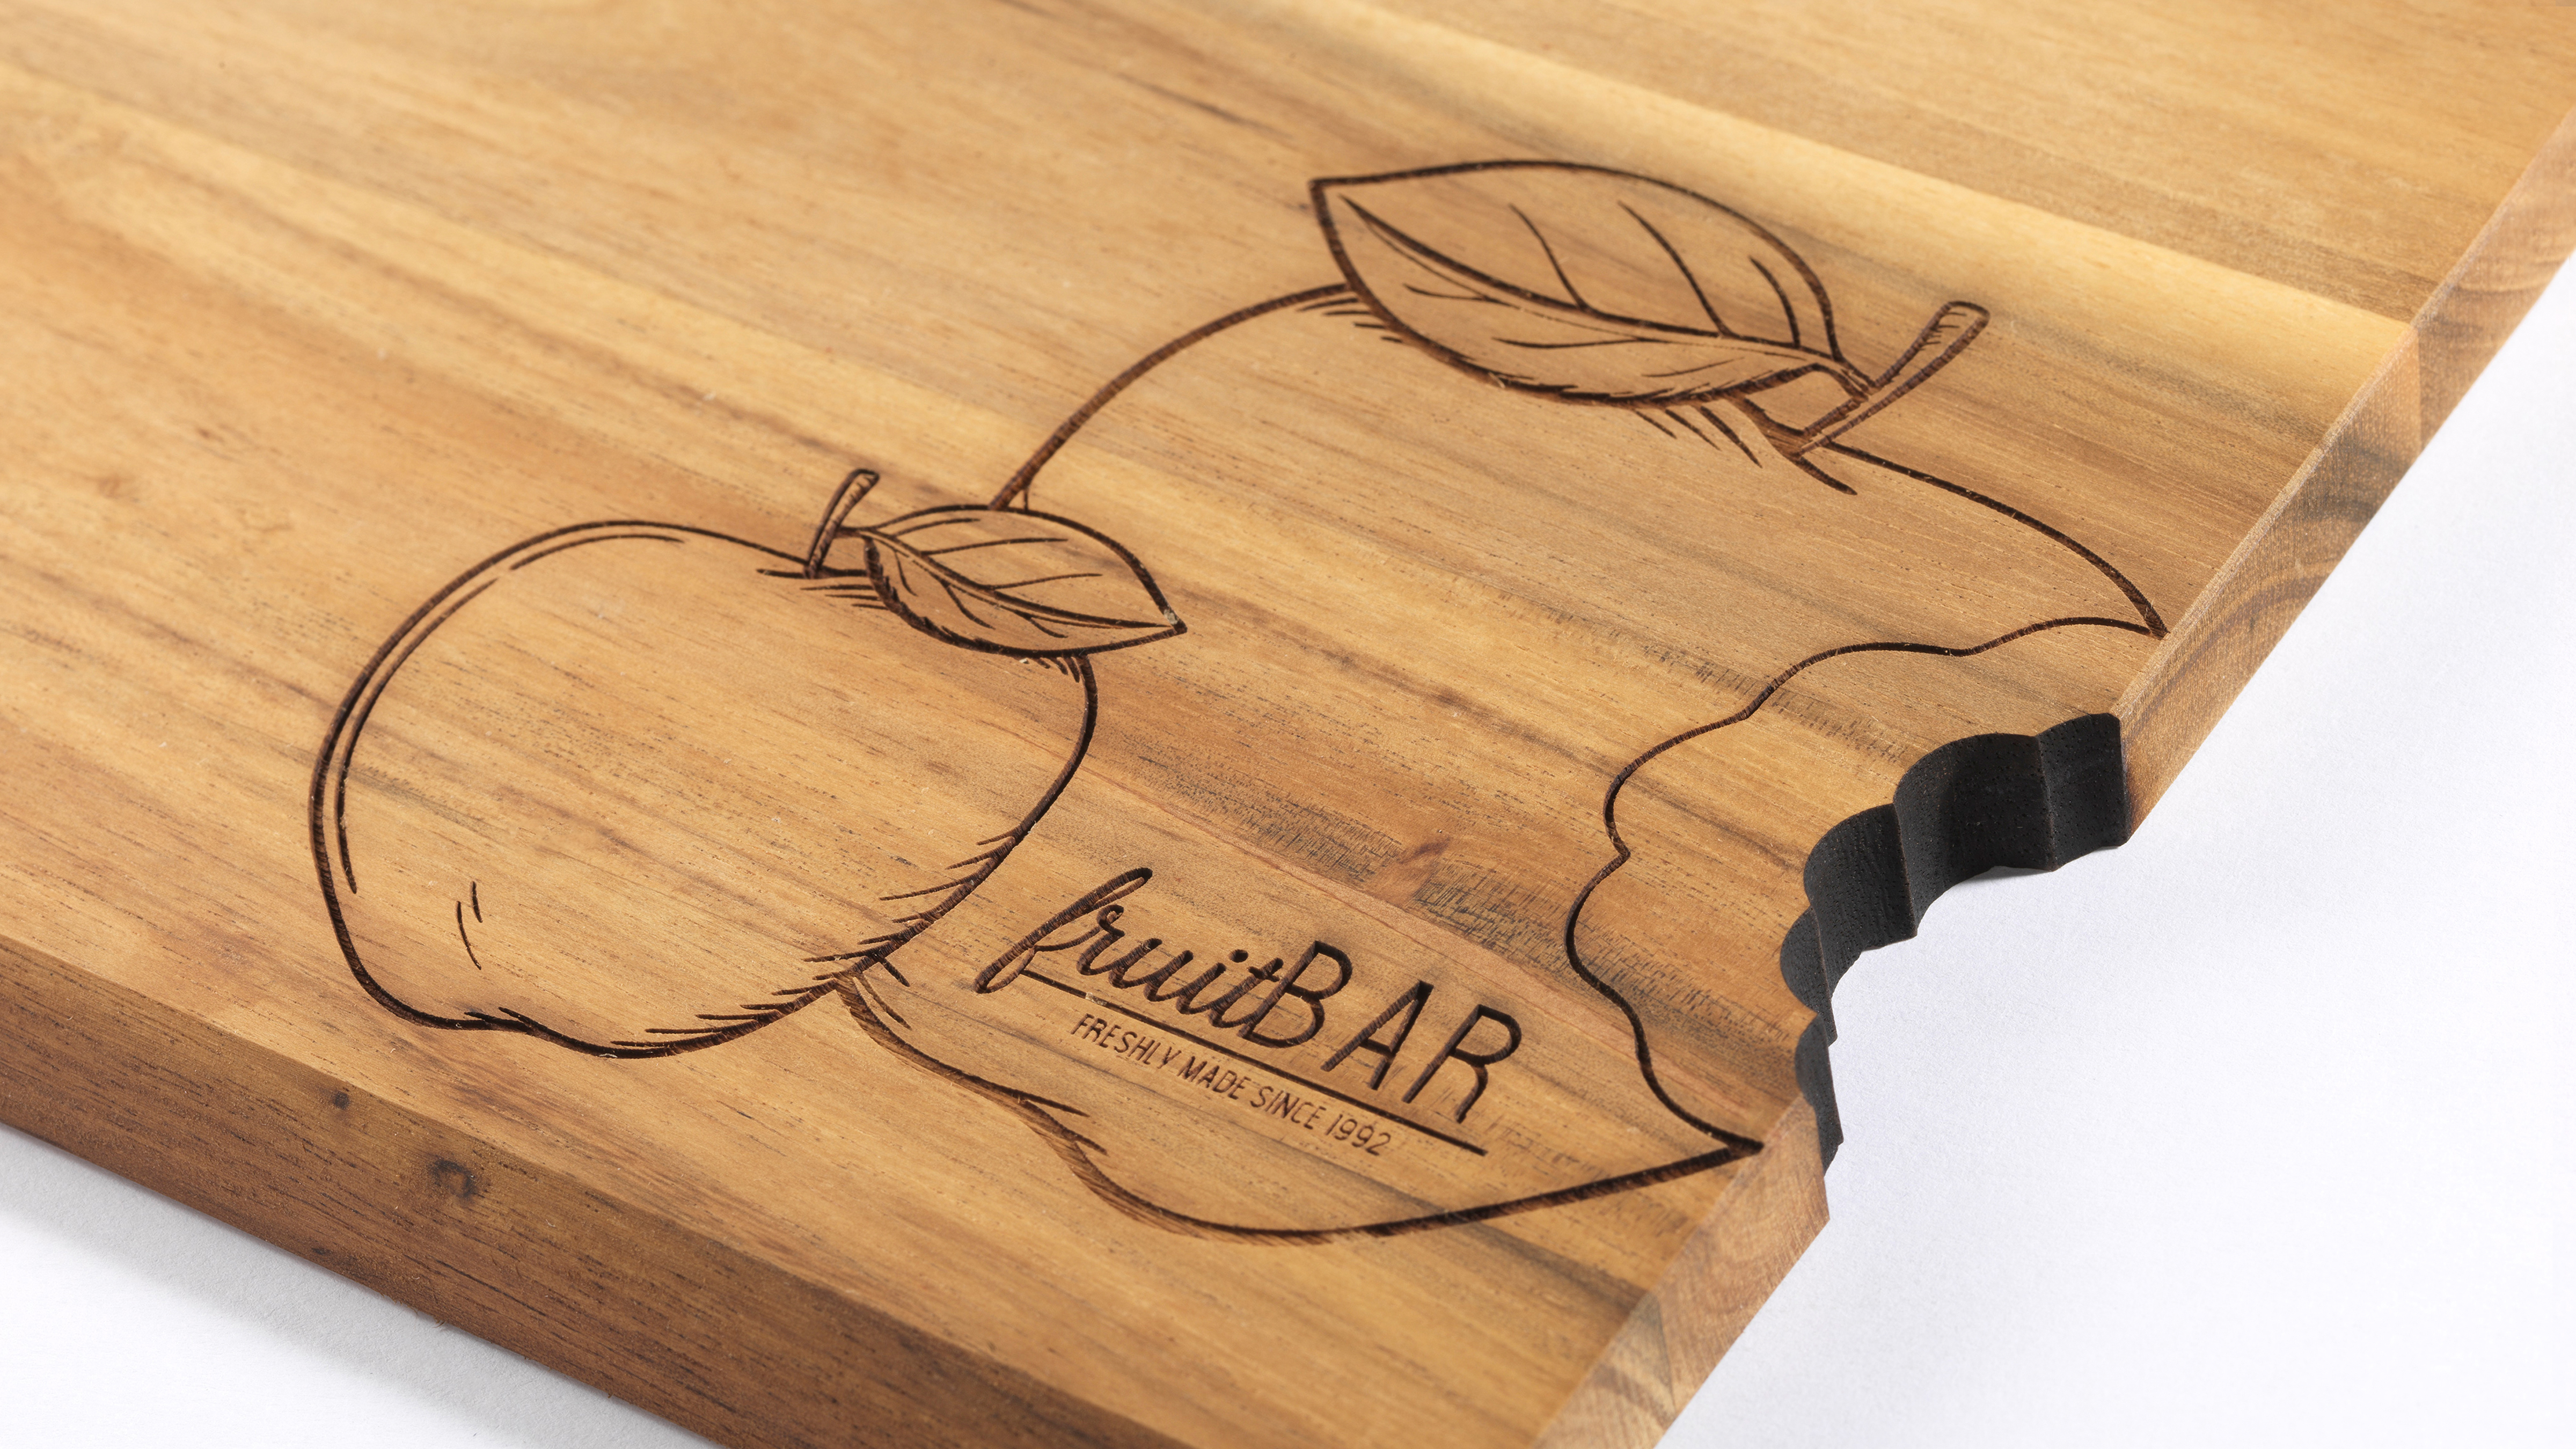 Custom laser engraving and woodworking